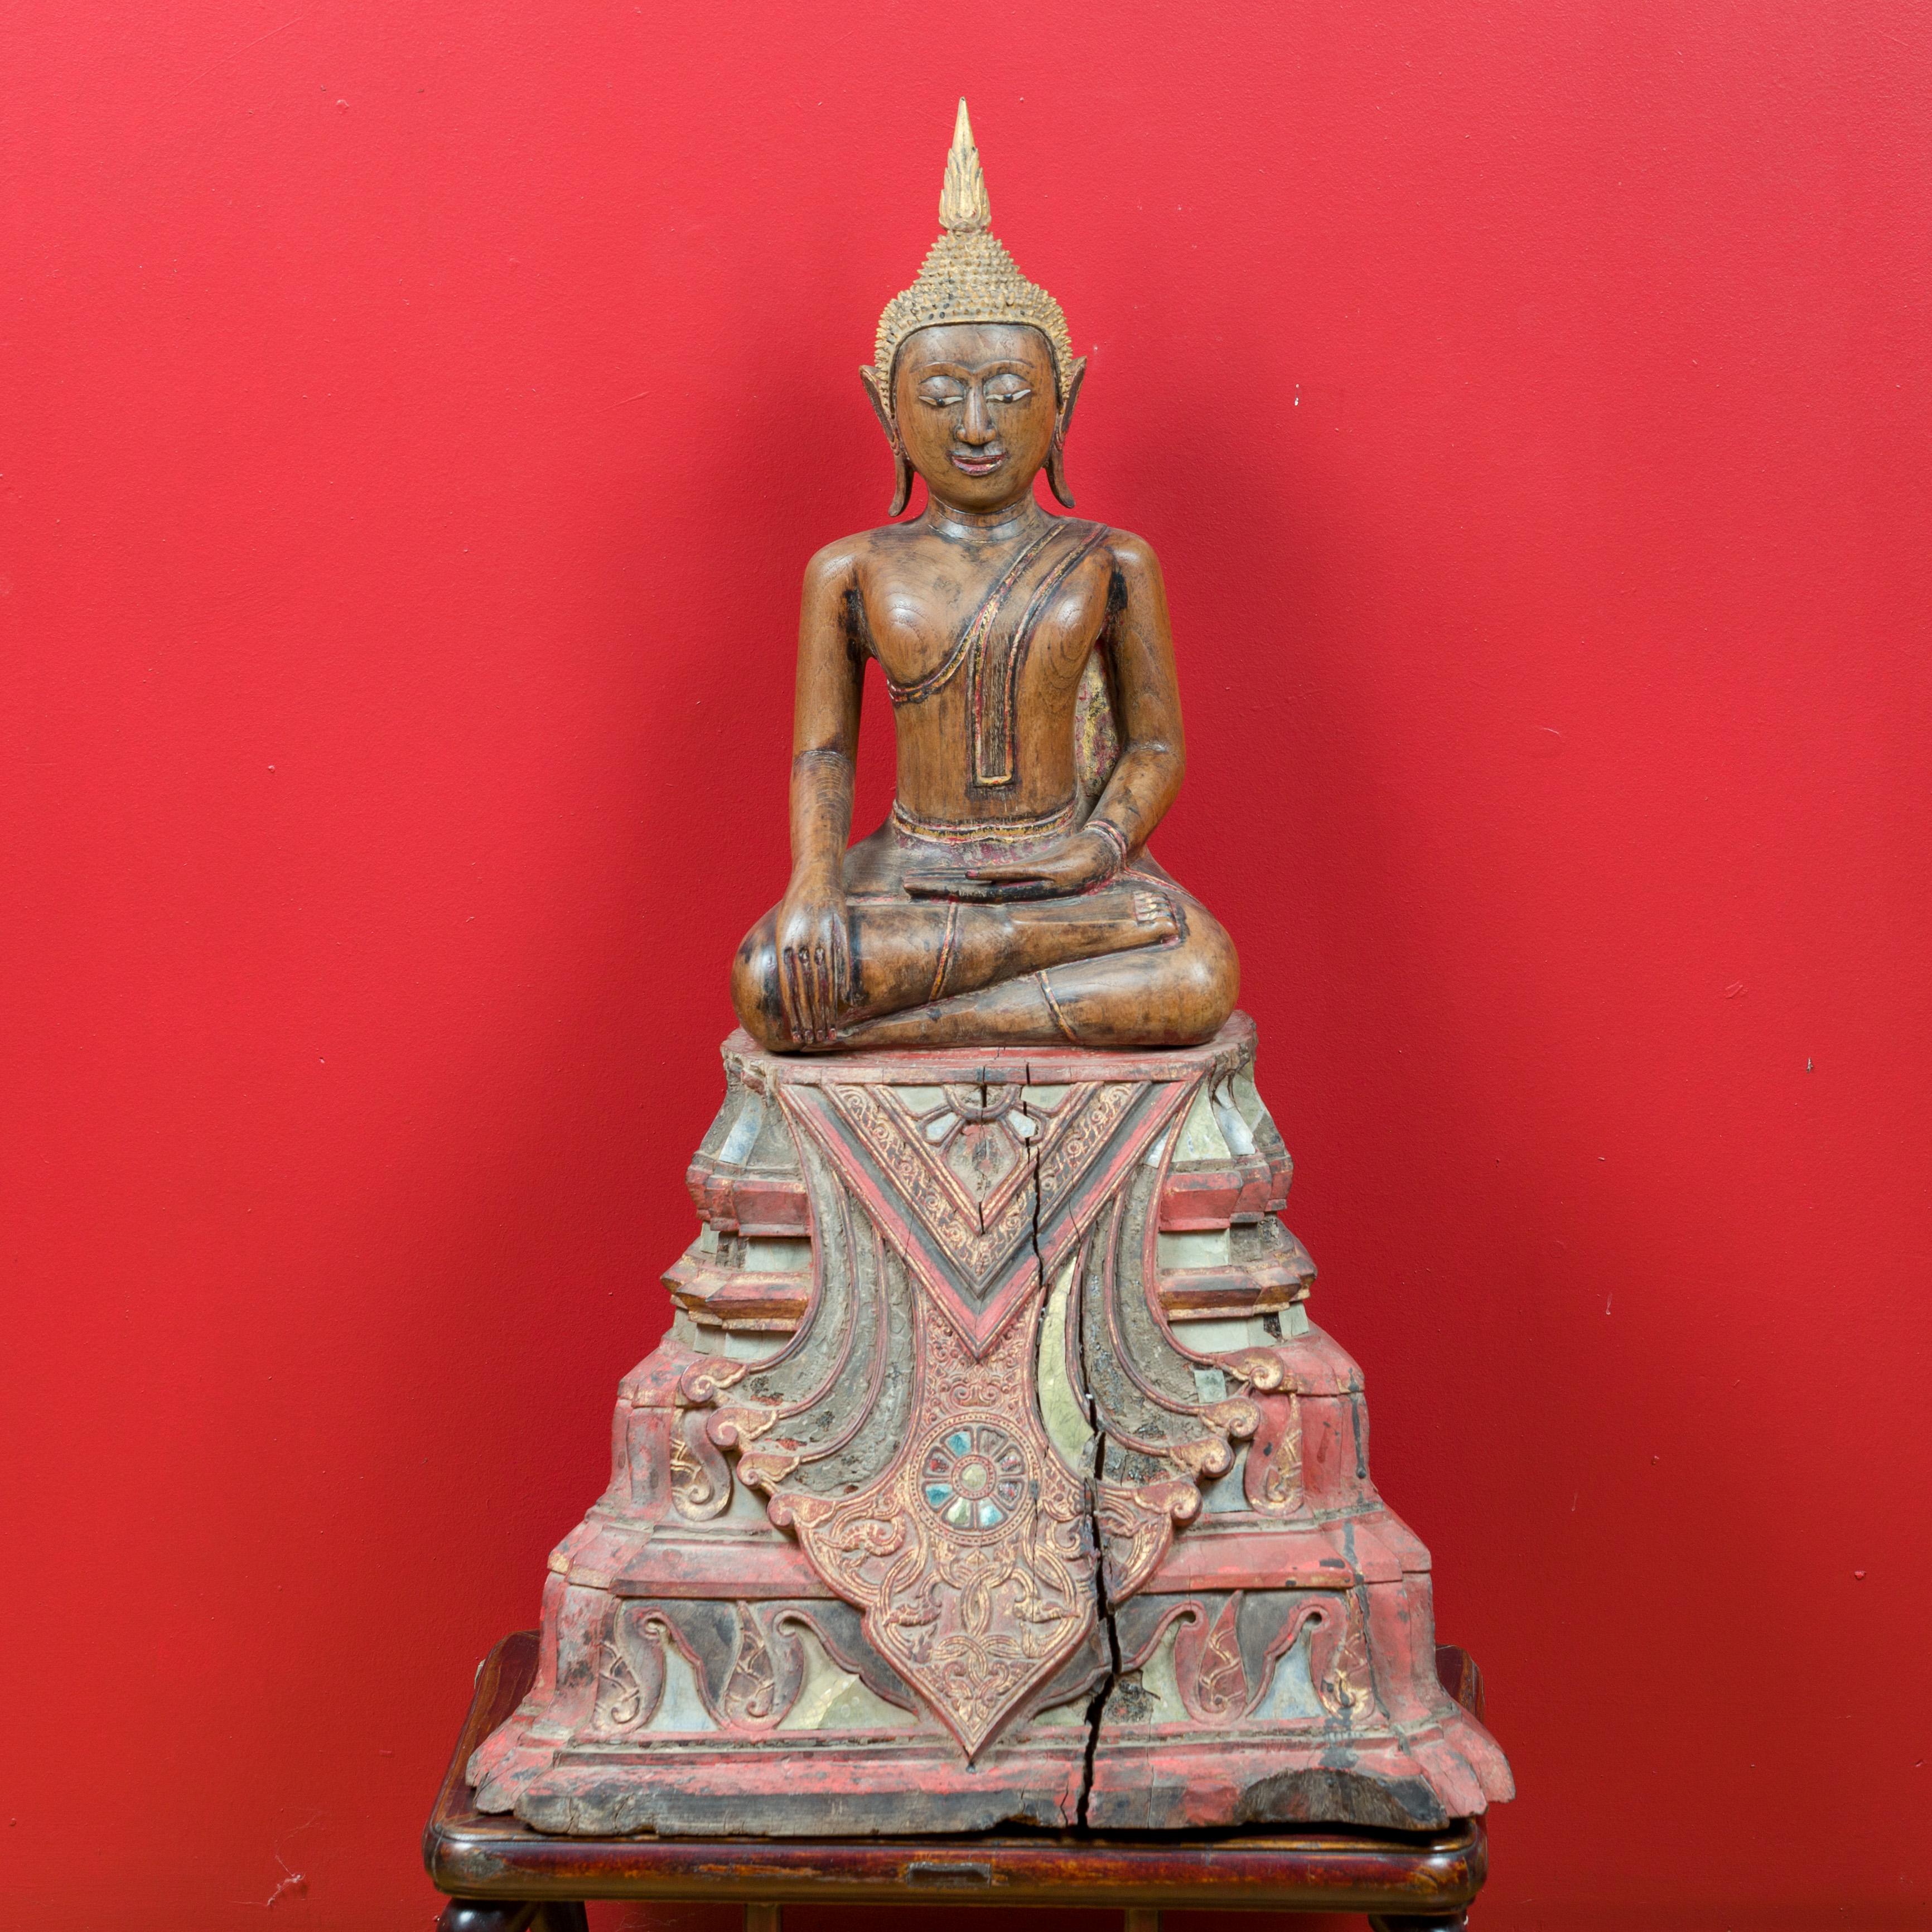 A Thai teak wood seated Buddha sculpture from the 17th-18th century, in the Calling the Earth to Witness position. Created in Thailand during the 17th or 18th century, this carved sculpture depicts the Buddha during the meditation that will bring